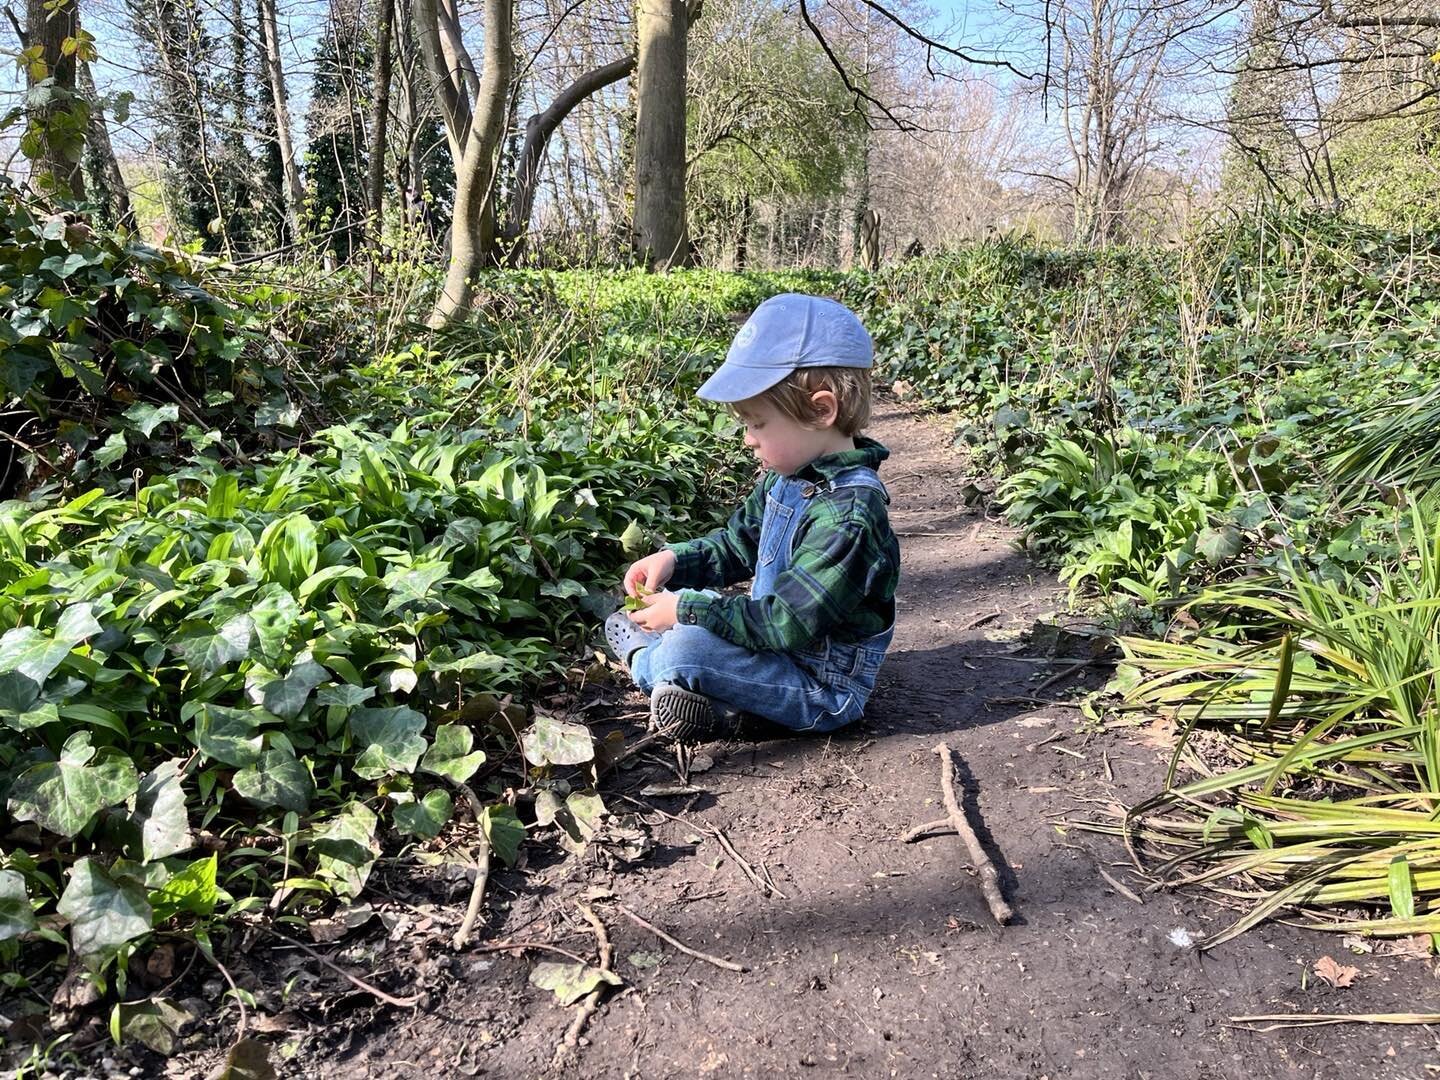 Wild garlic season has arrived ❤️ boys home with me today (work evaporates) but we get to enjoy a bit of foraging along our river instead.